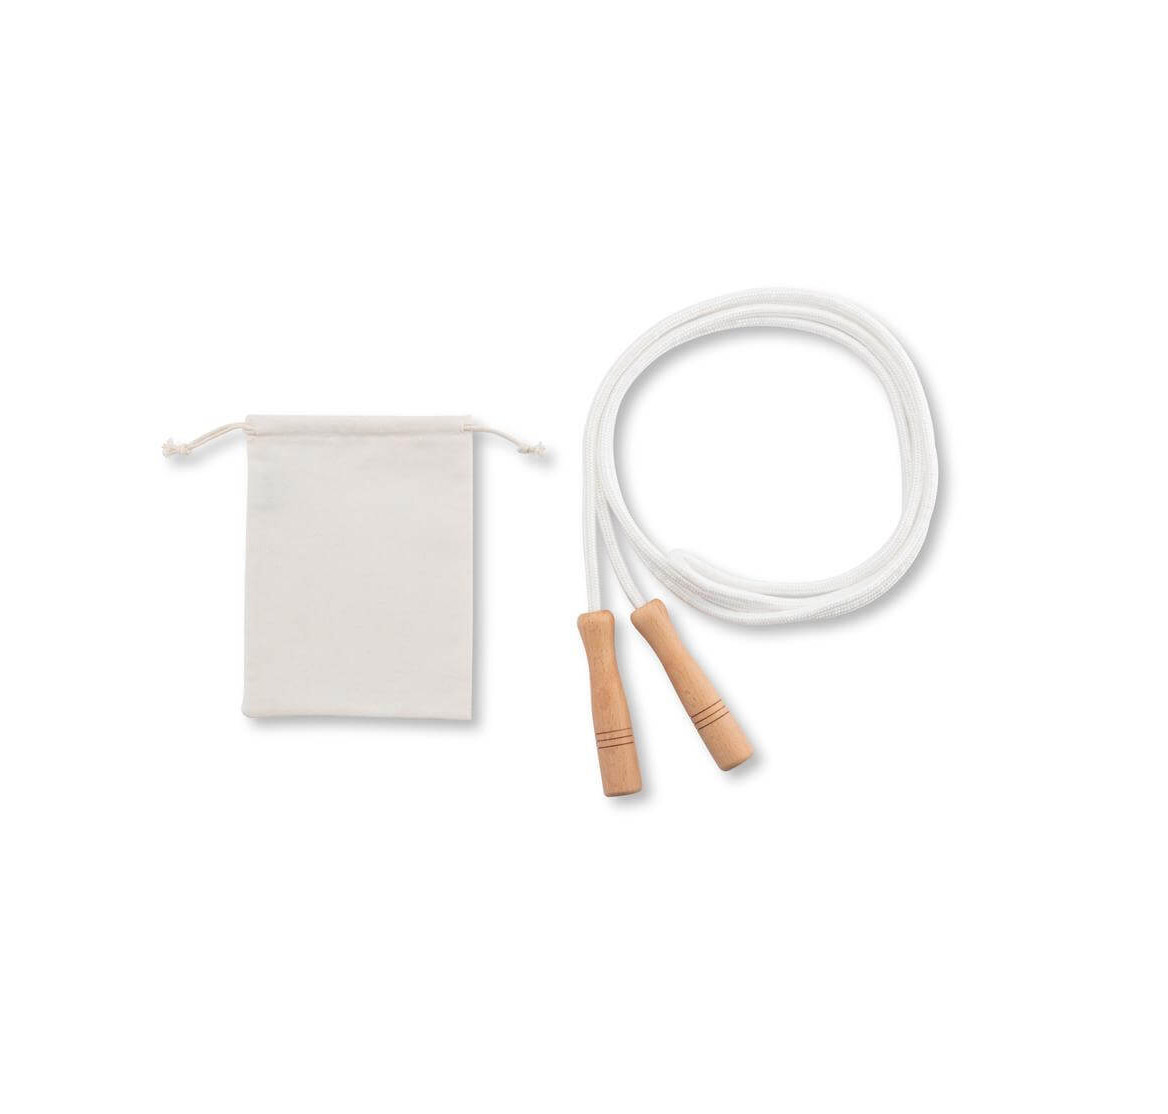 [WNEN 165] XANTHI – Cotton Jumping Rope in a Cotton Pouch